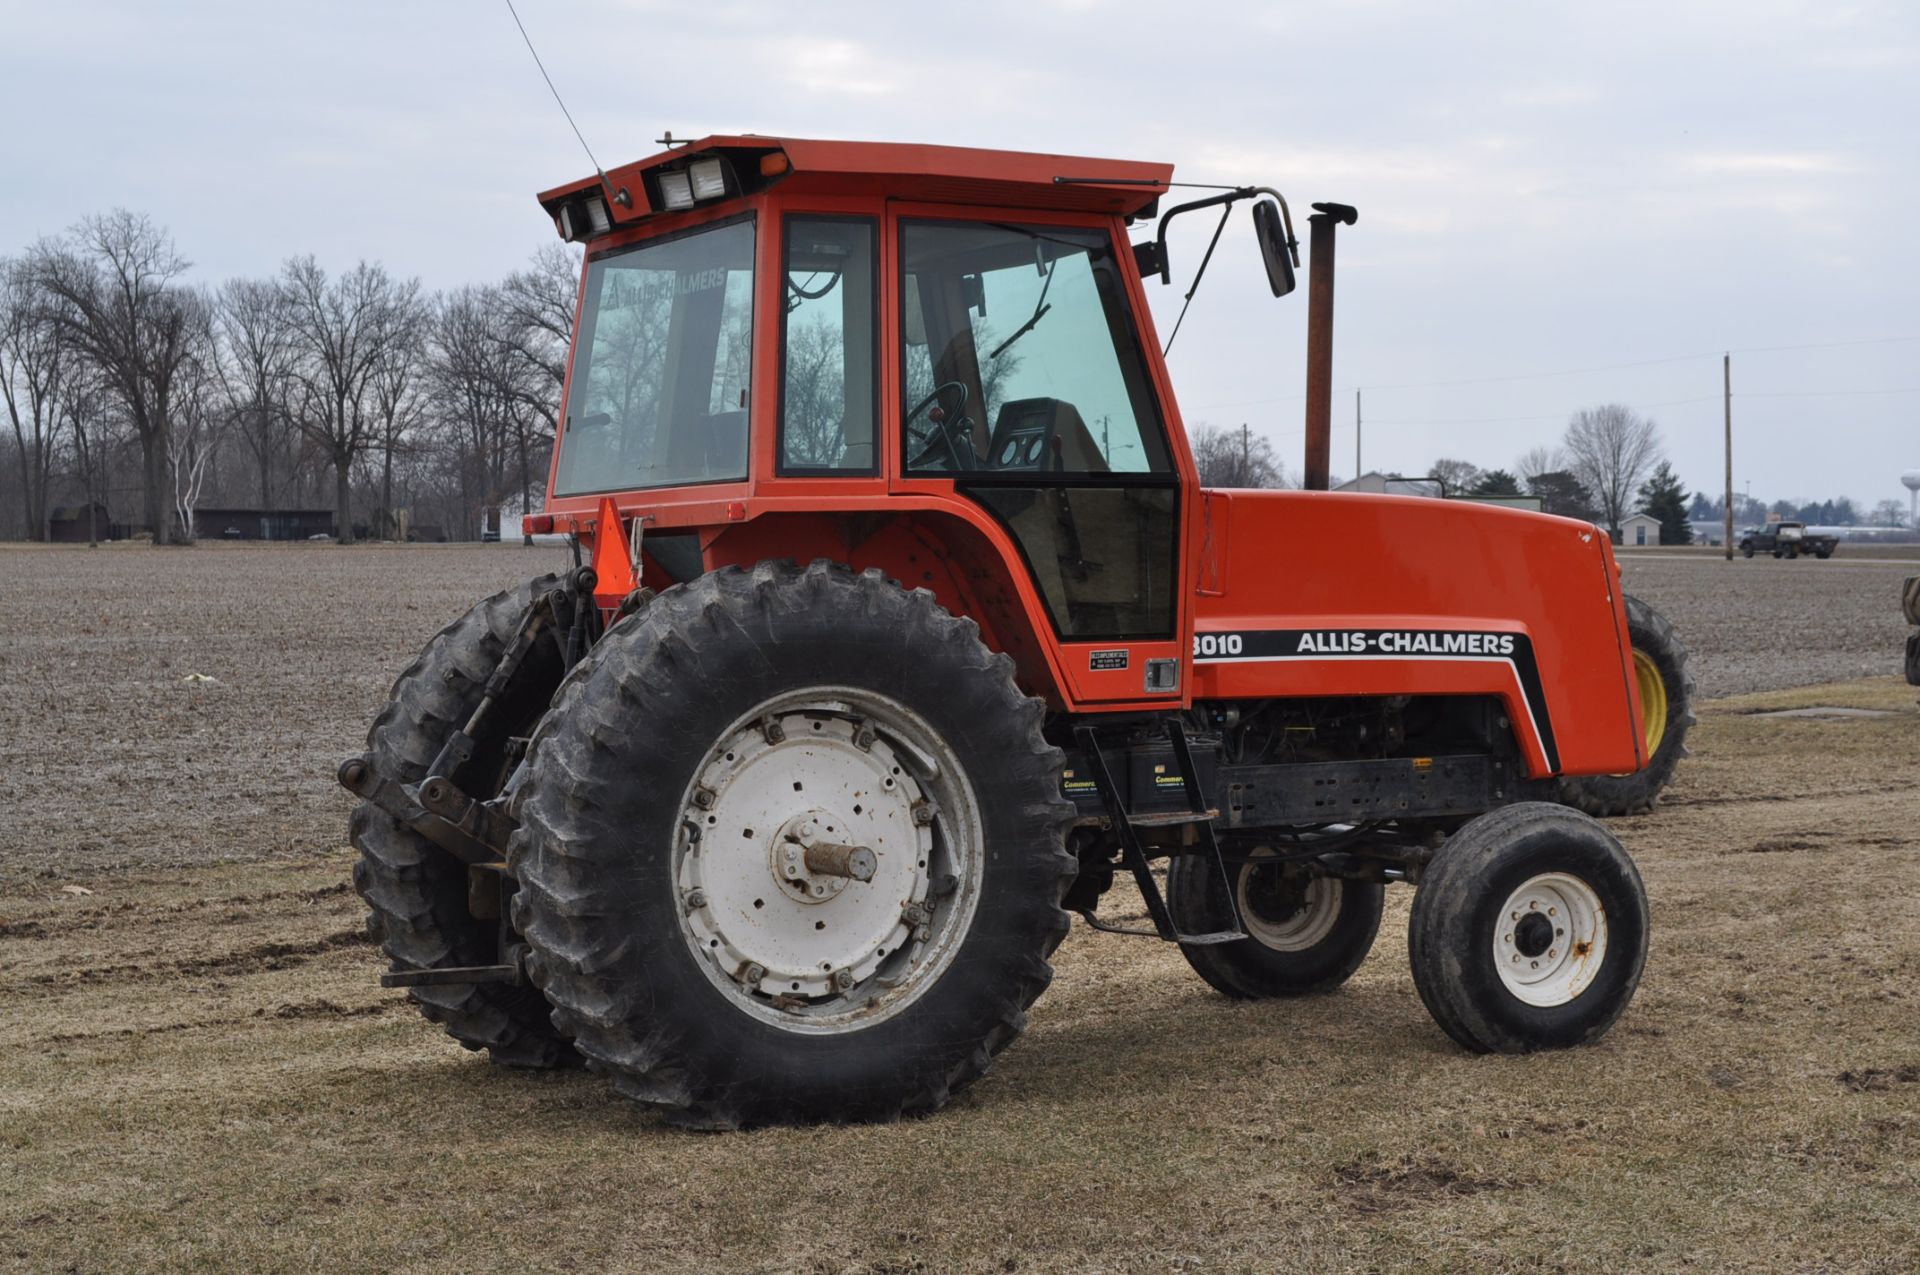 1982 Allis Chalmers 8010 tractor, power direct 20 spd, CHA, 2 remotes,540/1000 PTO, 3pt, 18.4 x 38 - Image 3 of 28